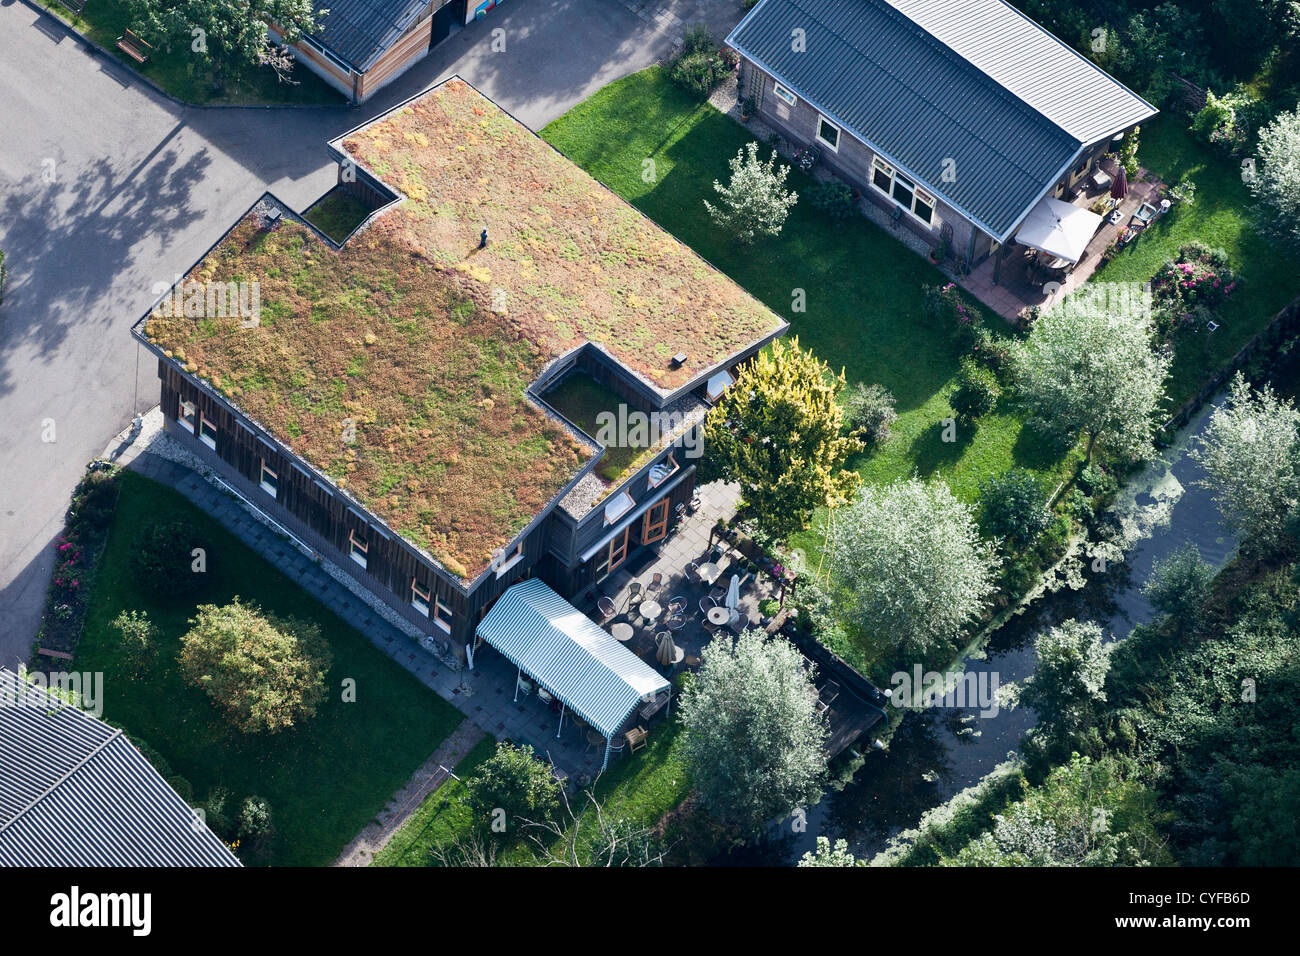 The Netherlands, Haarzuilens. House with roof covered with vegetation, probably sedum. Aerial. Stock Photo